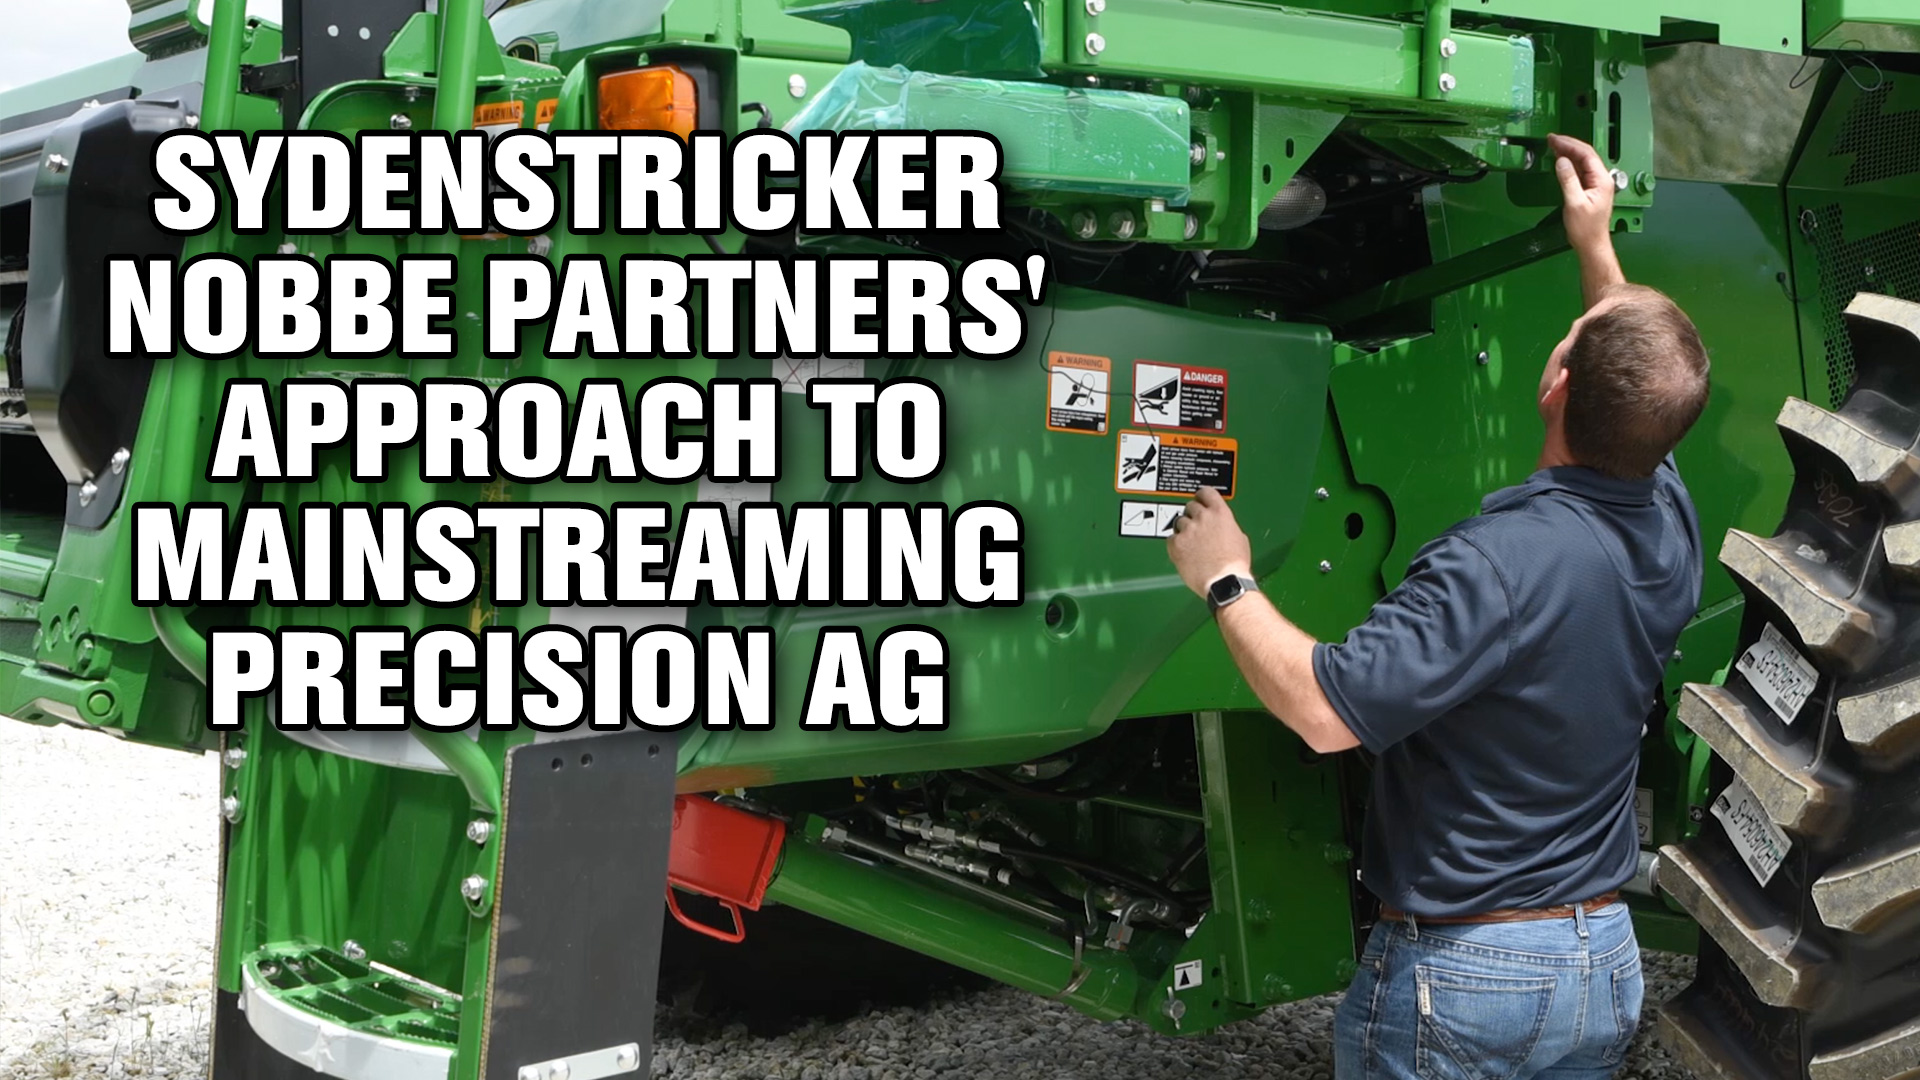 5-Sydenstricker-Nobbe-Partners--Approach-to-Mainstreaming-Precision-Ag.jpg